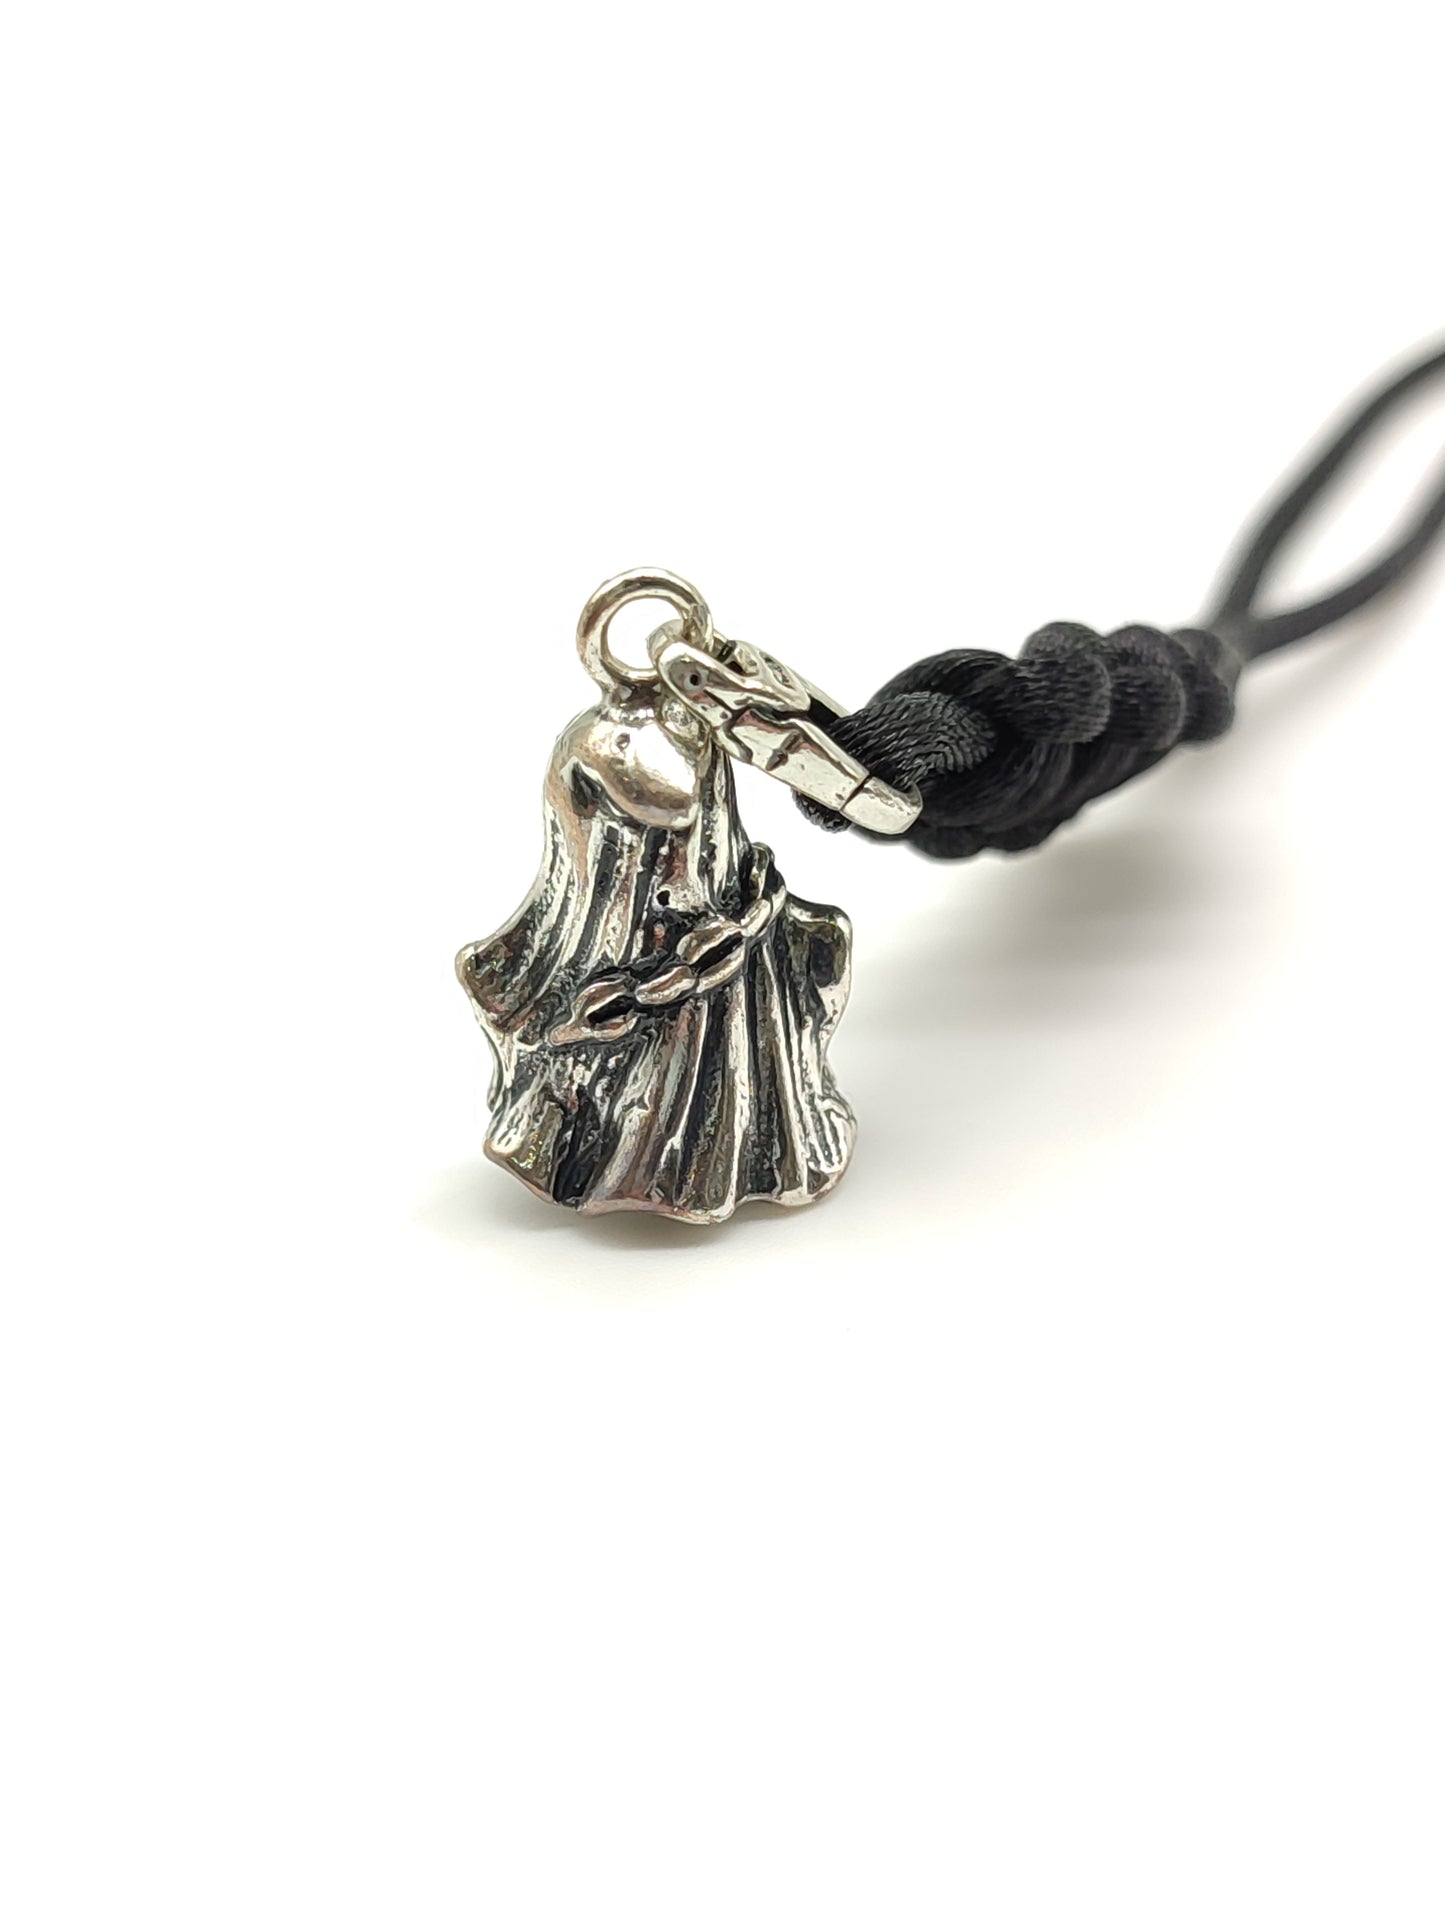 Silver ghost key ring with satin cord